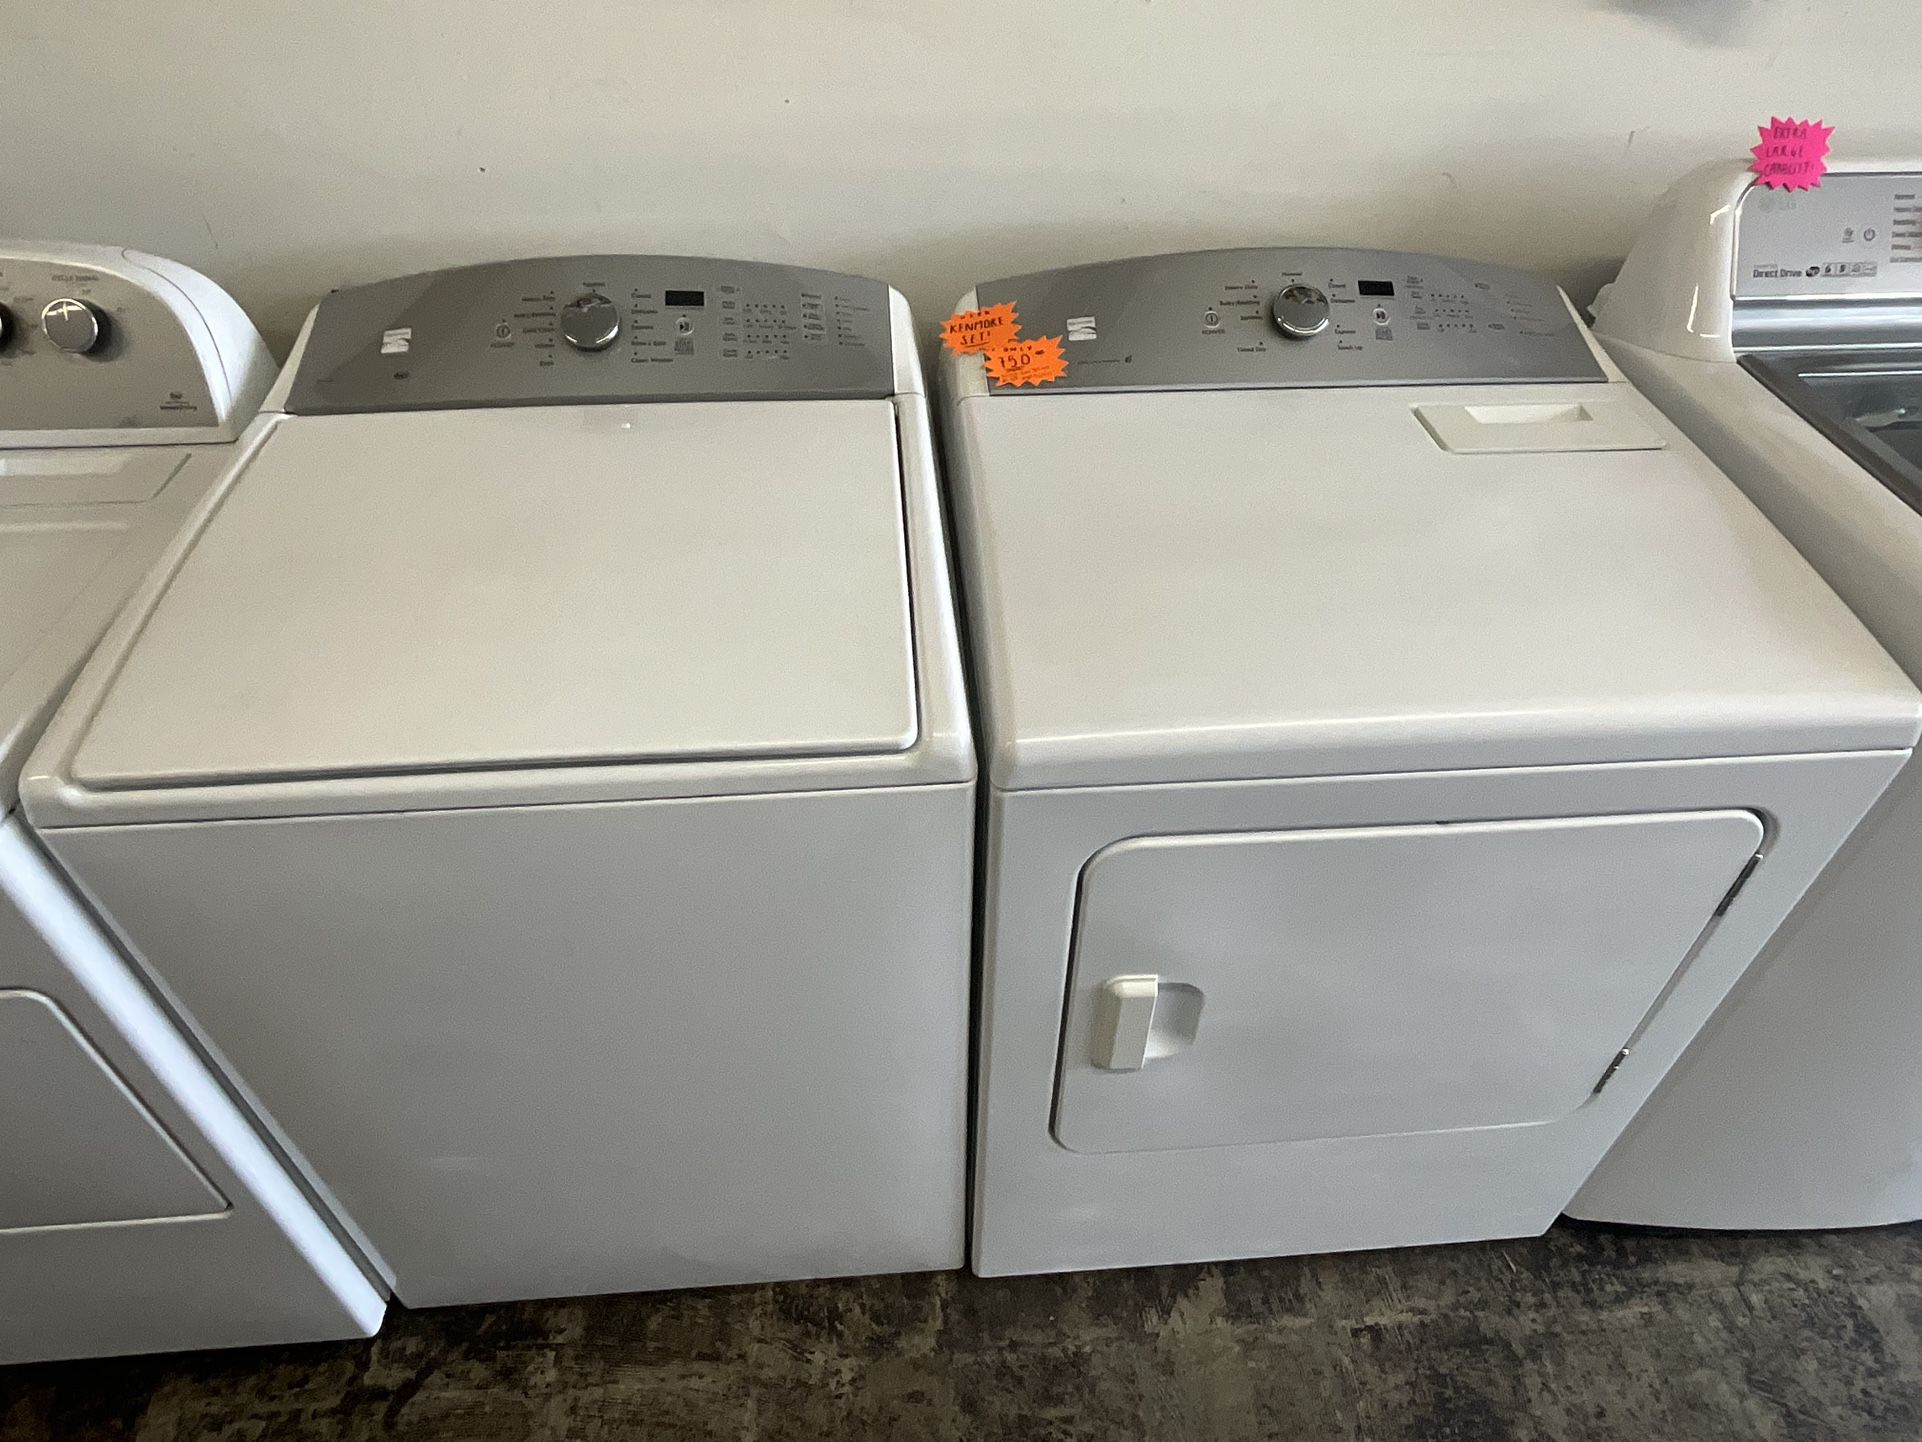 USED KENMORE WASHER AND DRYER SET